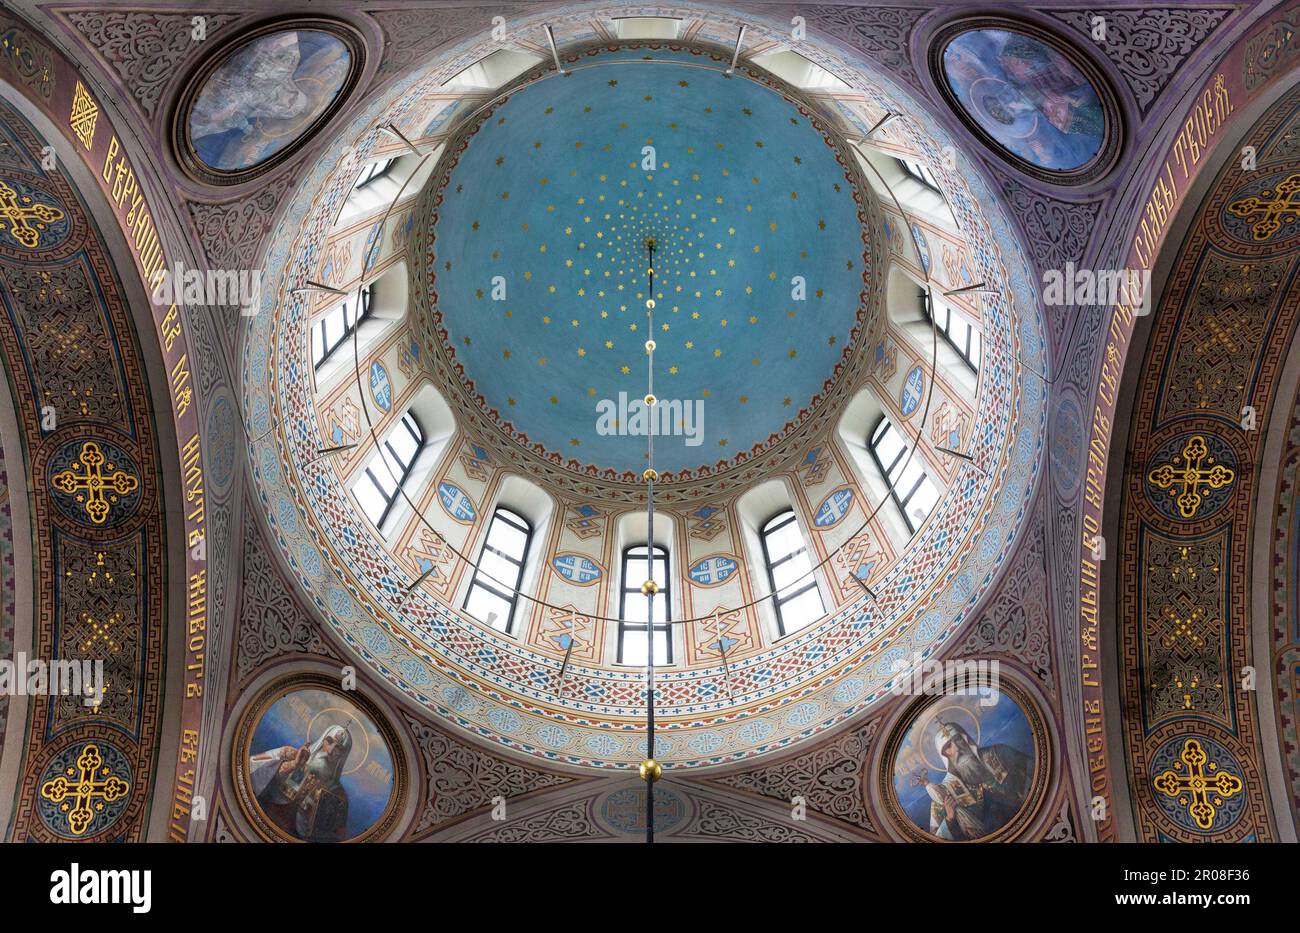 Looking up into the dome inside the Orthodox Uspenski Cathedral in Helsinki, Finland. The cathedral was inaugurated on 25 October 1868. Stock Photo